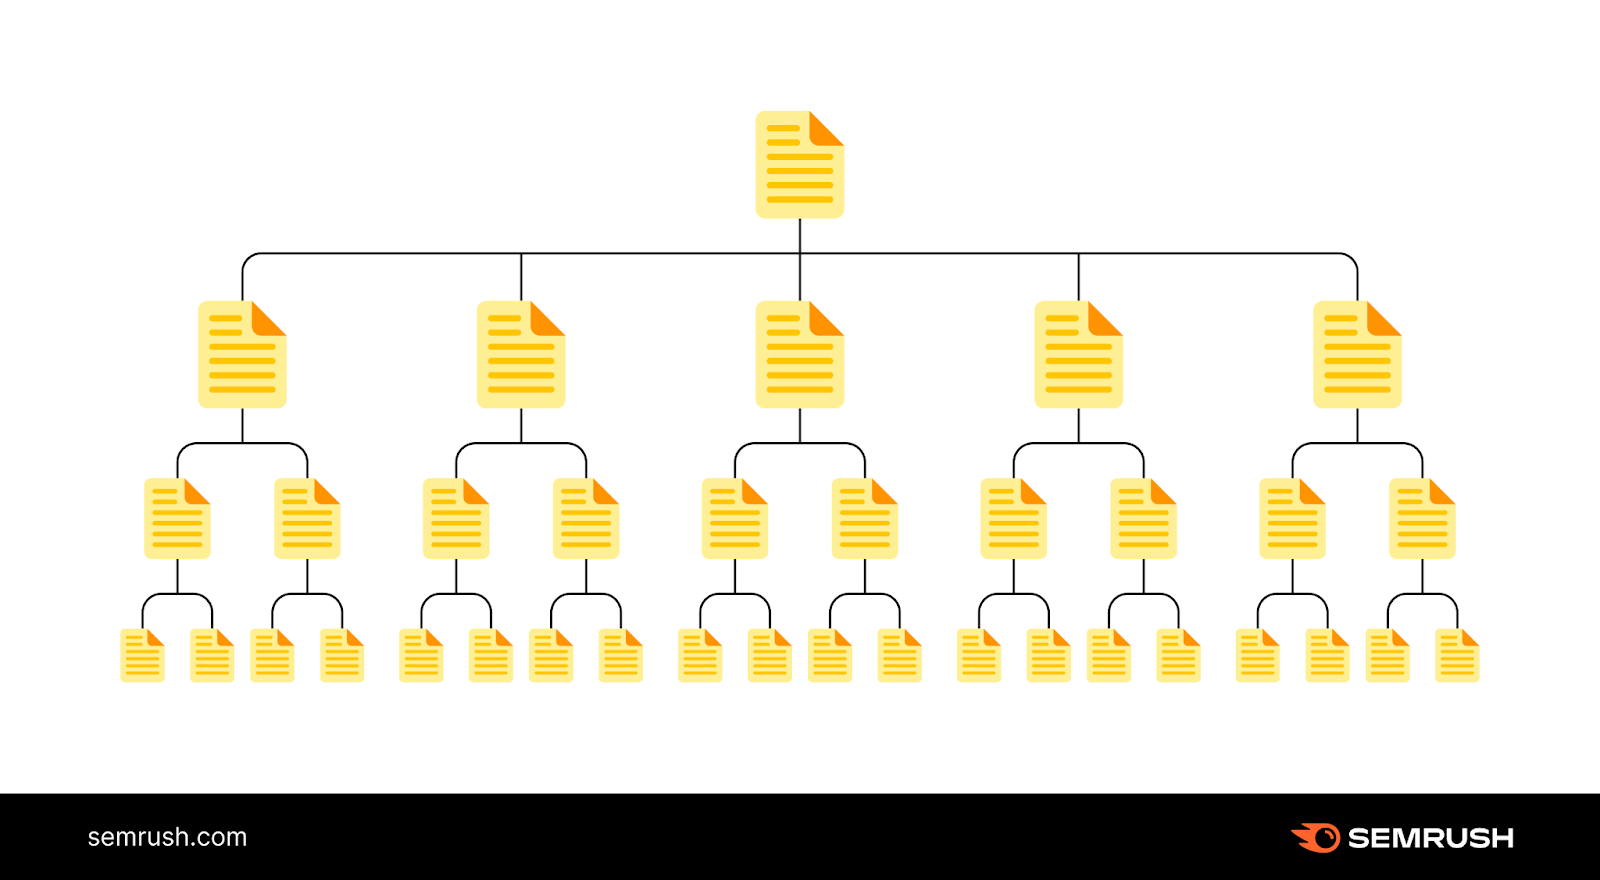 Hierarchical architecture is a website structure that organizes content in a hierarchical manner, with multiple levels of navigation and categorization. 